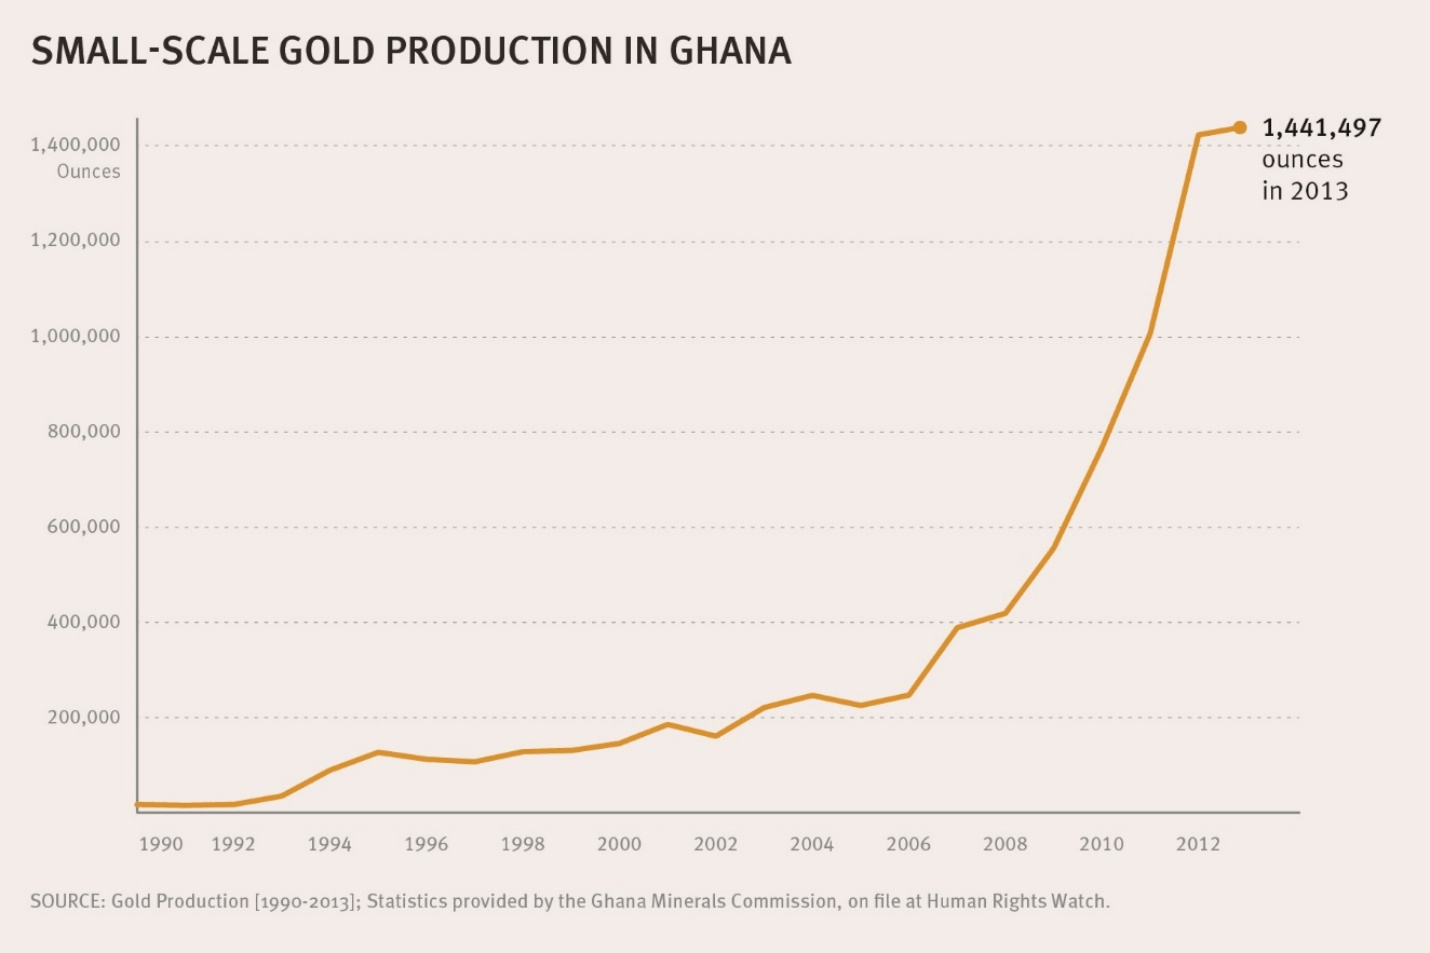 Graphic of small-scale gold production in Ghana